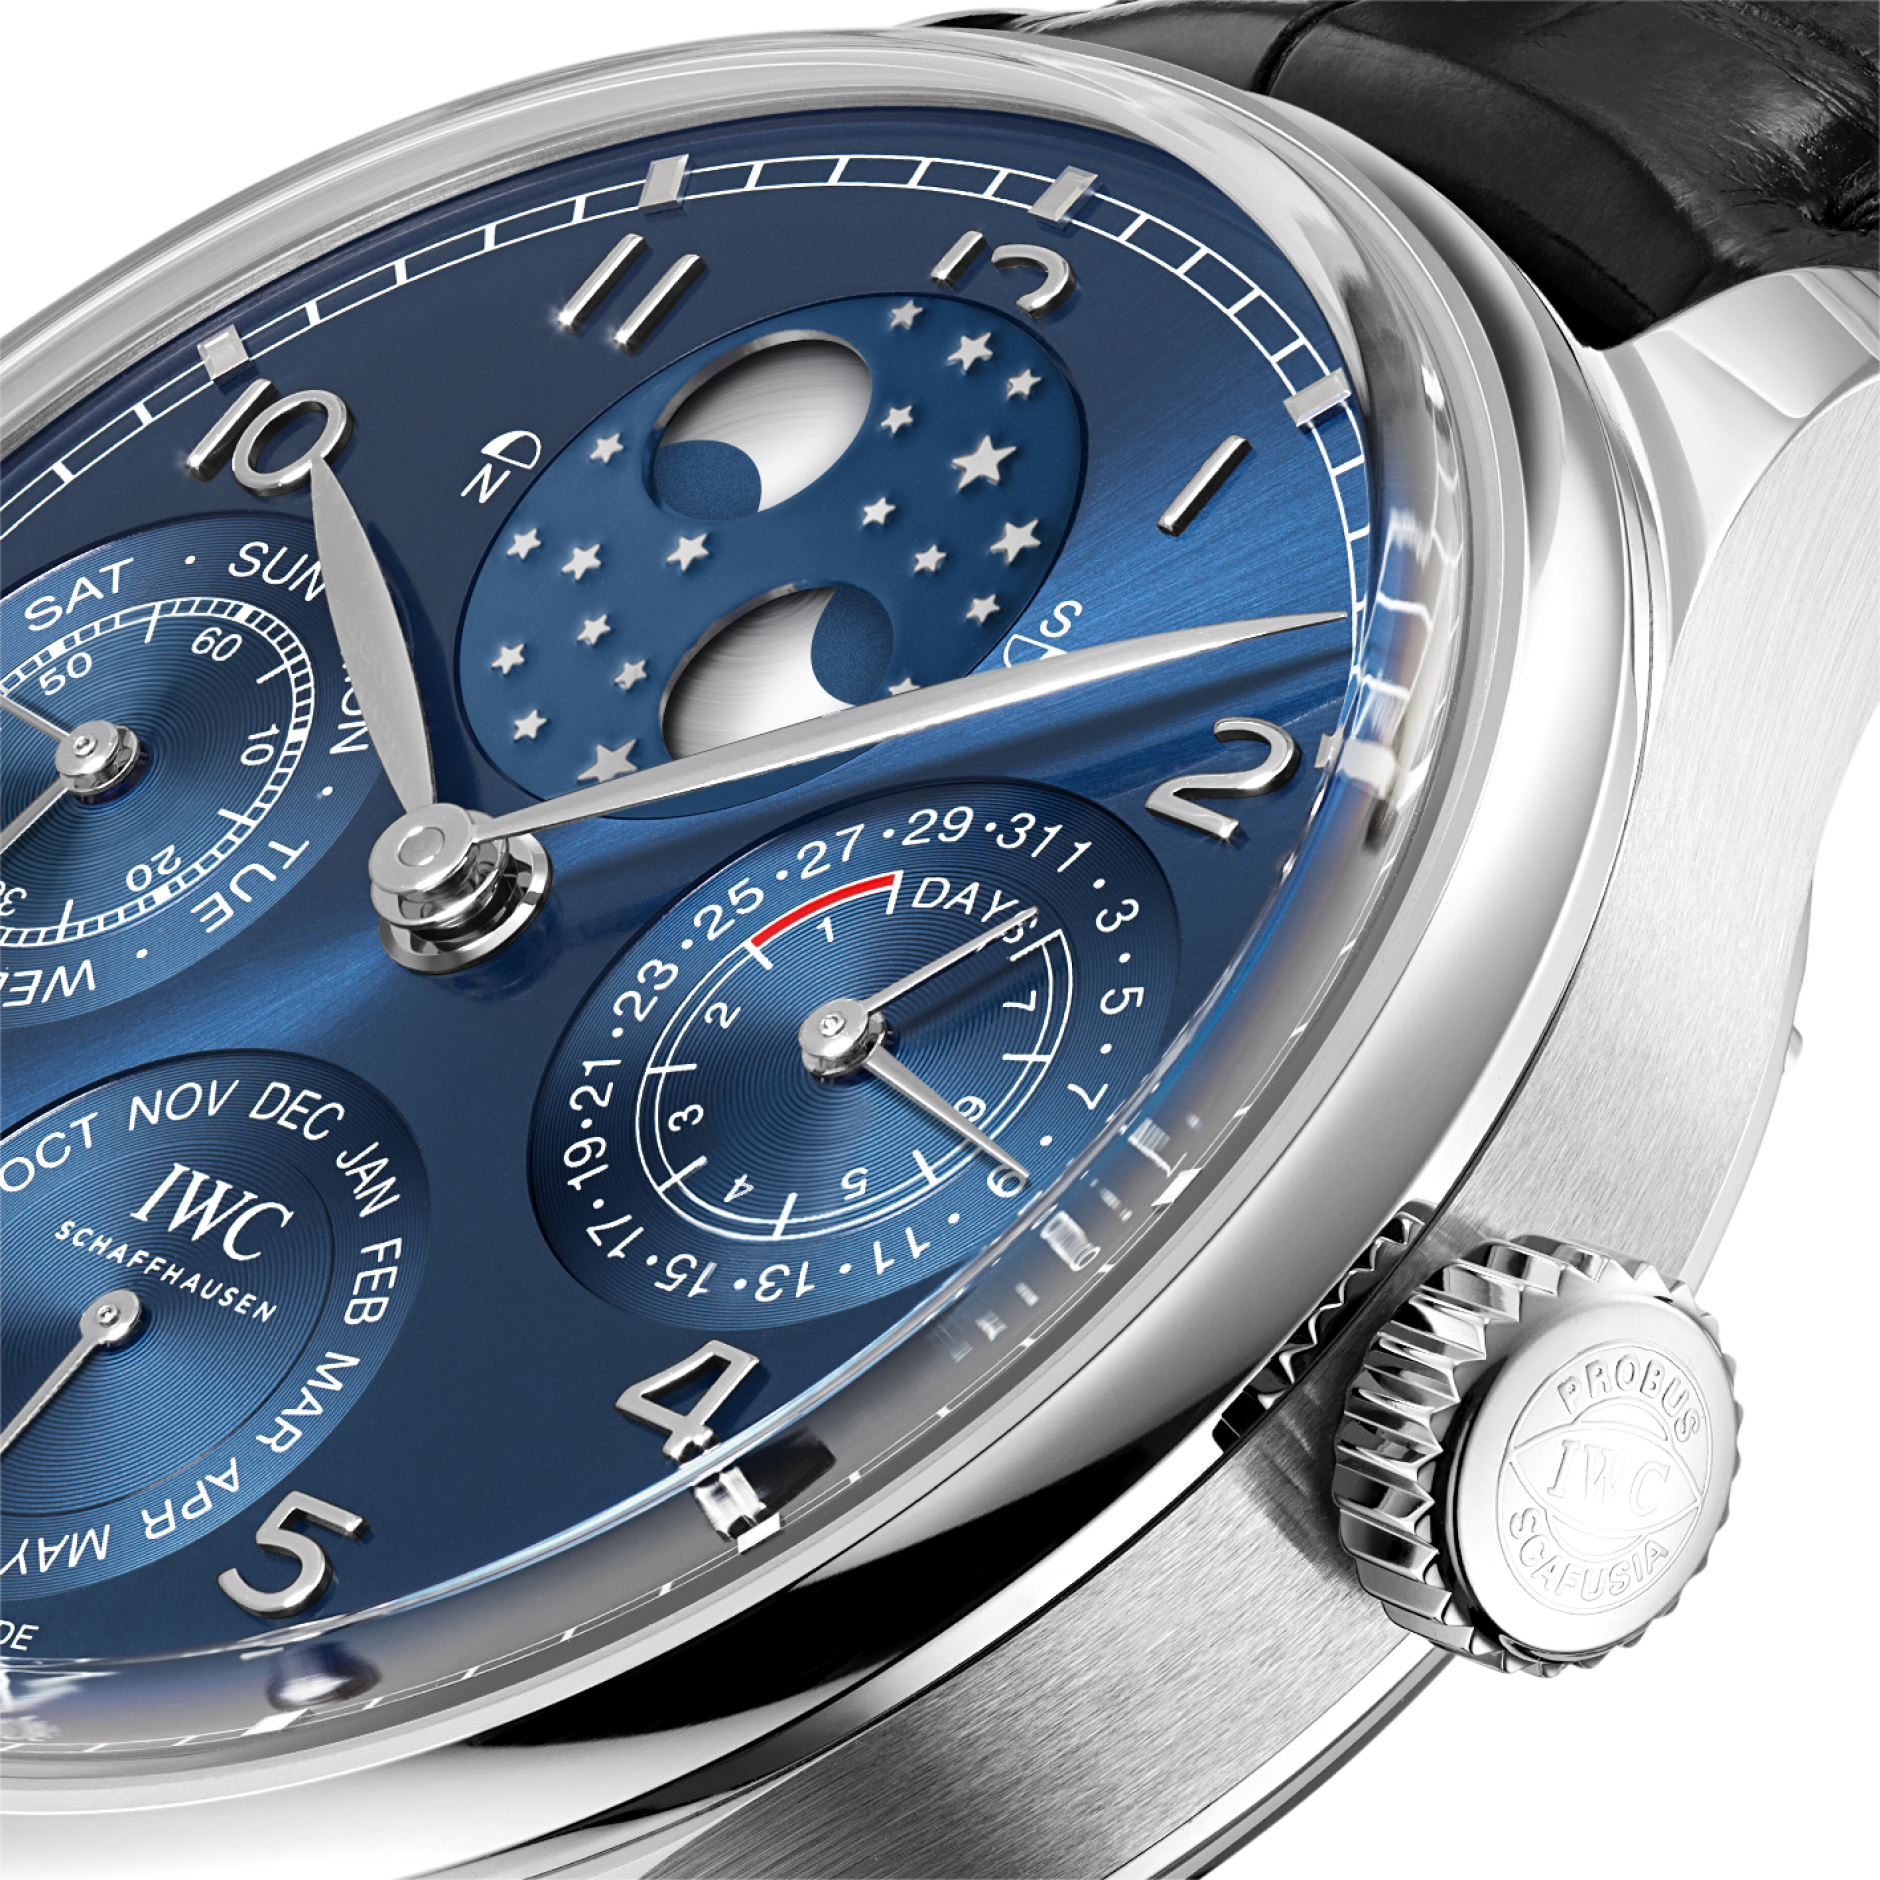 IWC Portugieser Perpetual Calendar Moonphase 44.2mm Blue 18 Ct White Gold Case